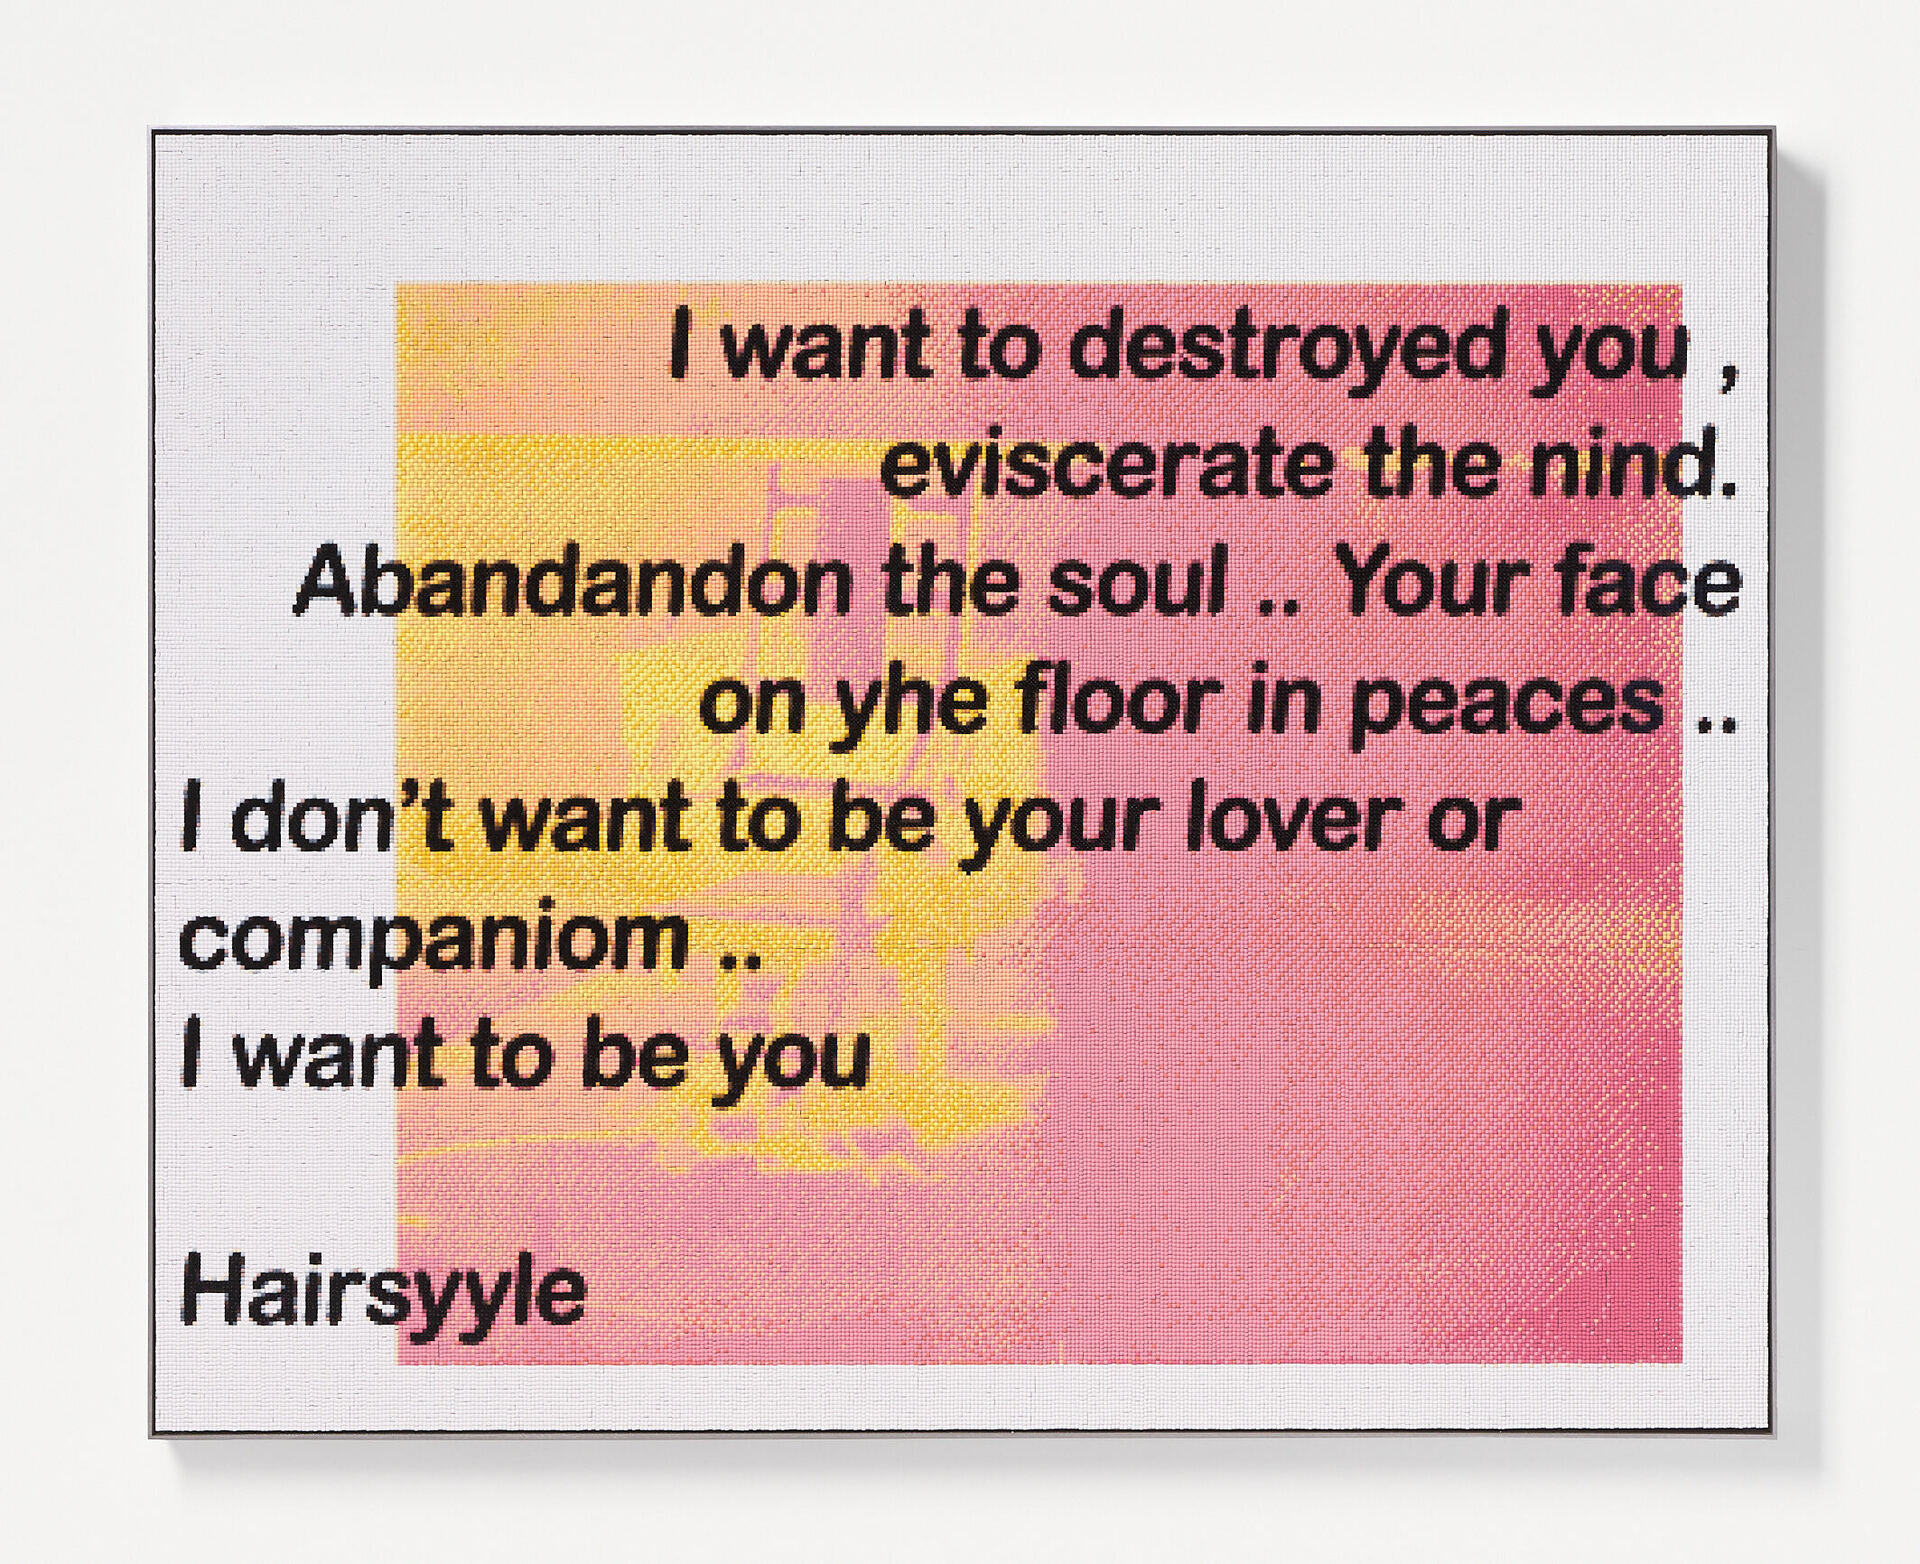 Victoria Todorov &amp; Spencer Lai I want to destroyed you (Andy’s Chair), 2020-21 Resin and adhesive on board, 80 x 100 cm